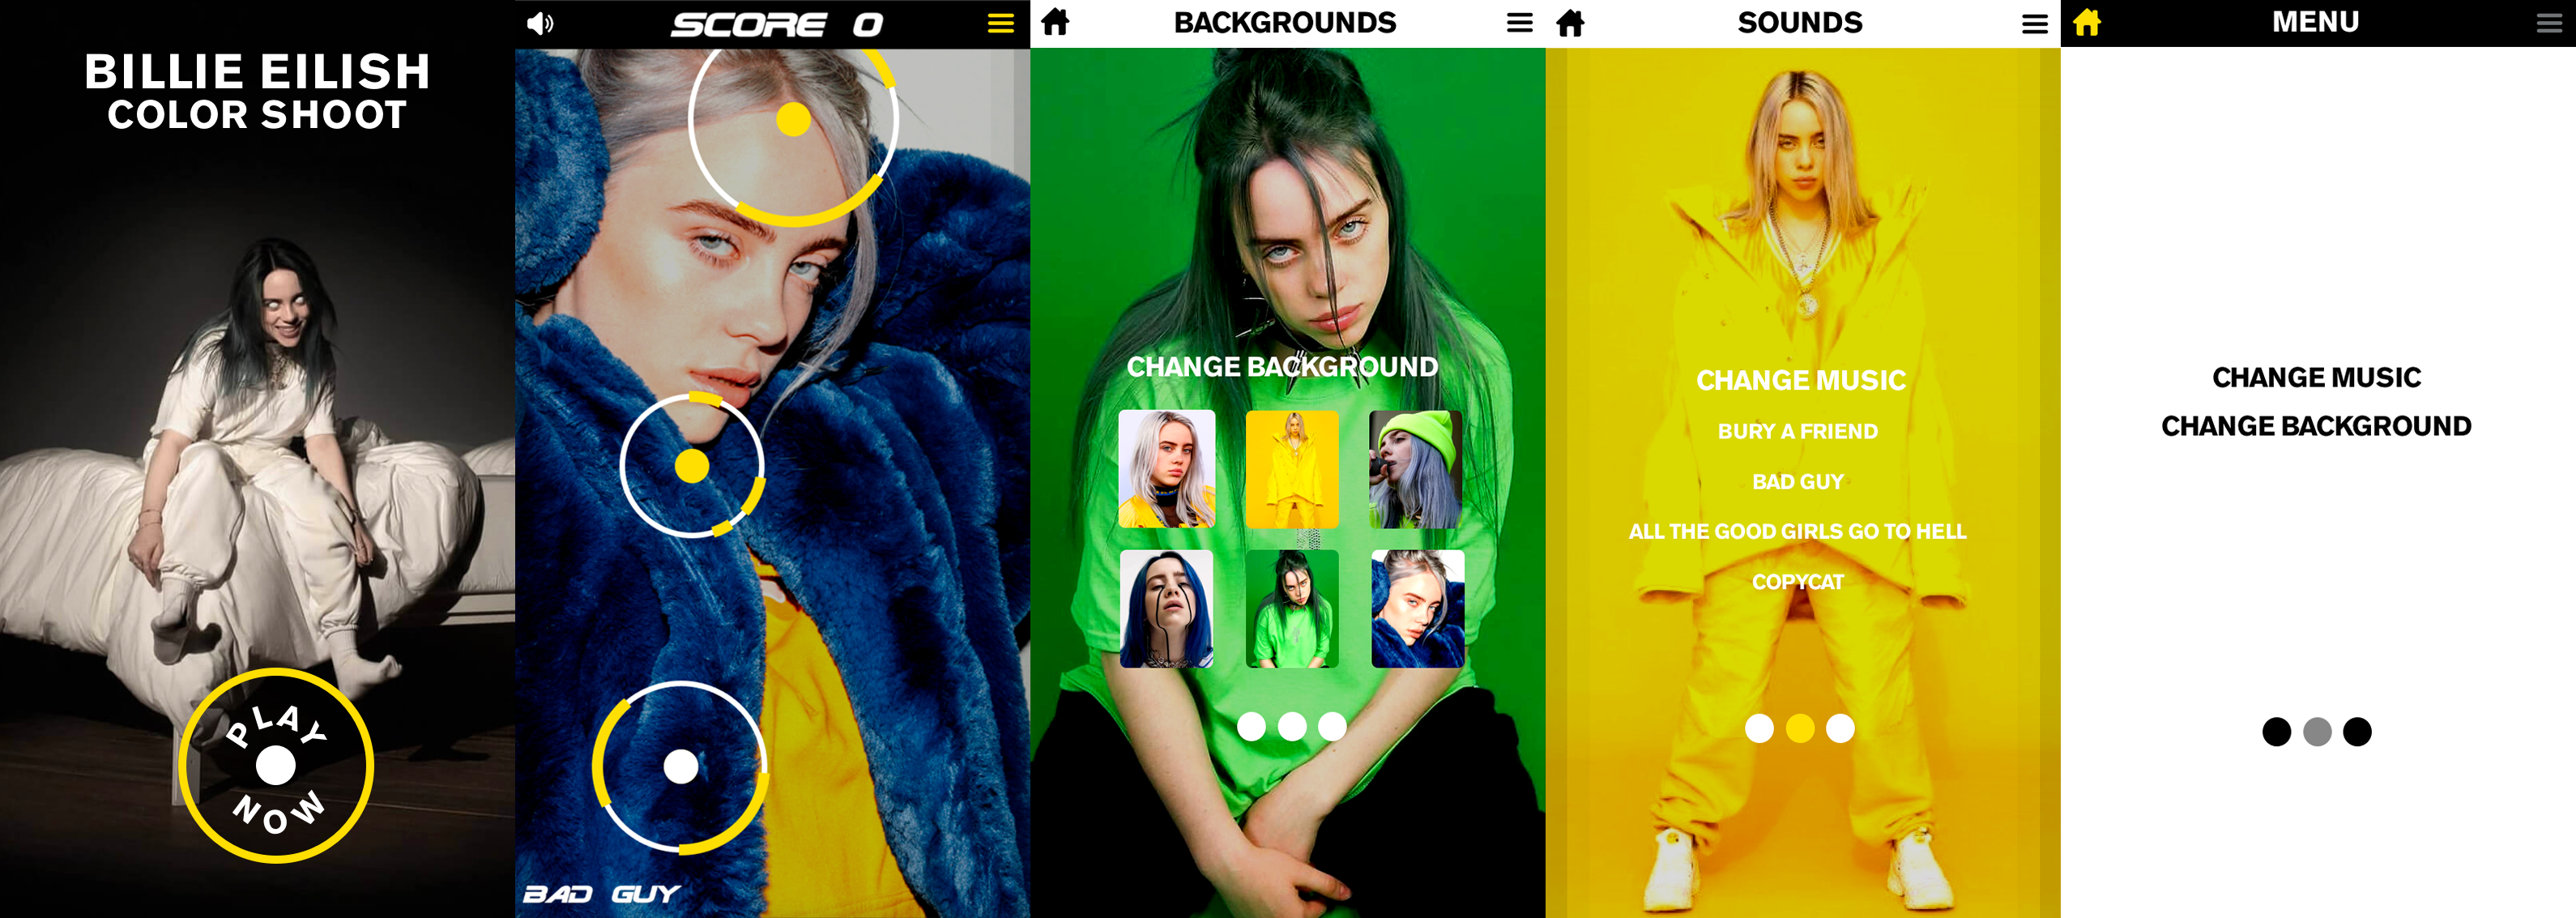 Paul Yanez Billie Eilish Color Shoot Game developed by Father and Daughter